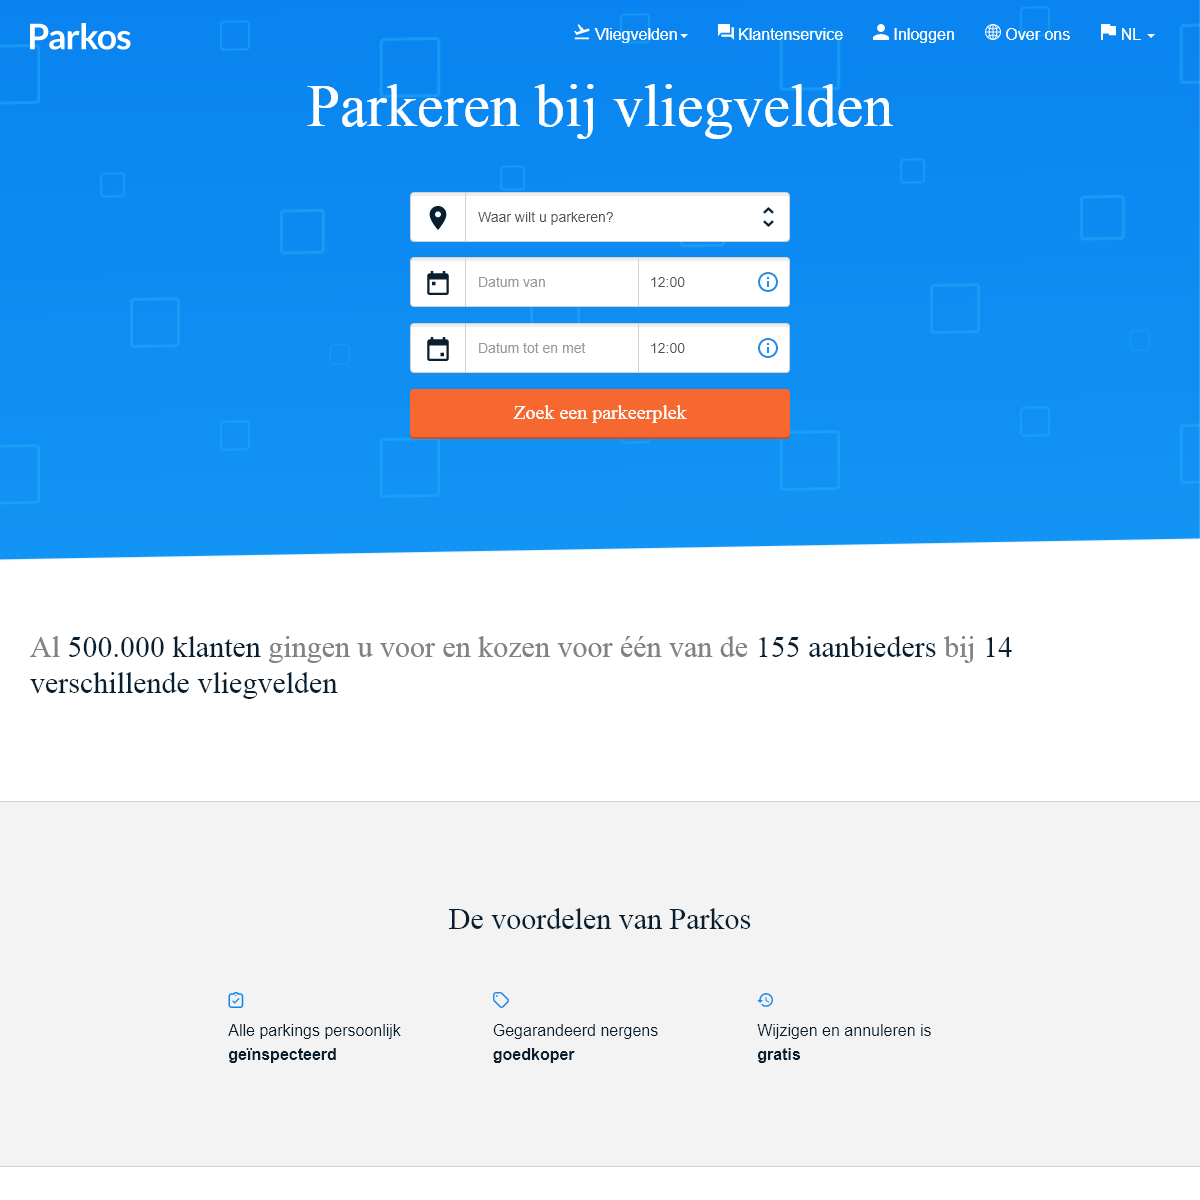 A complete backup of parkos.nl